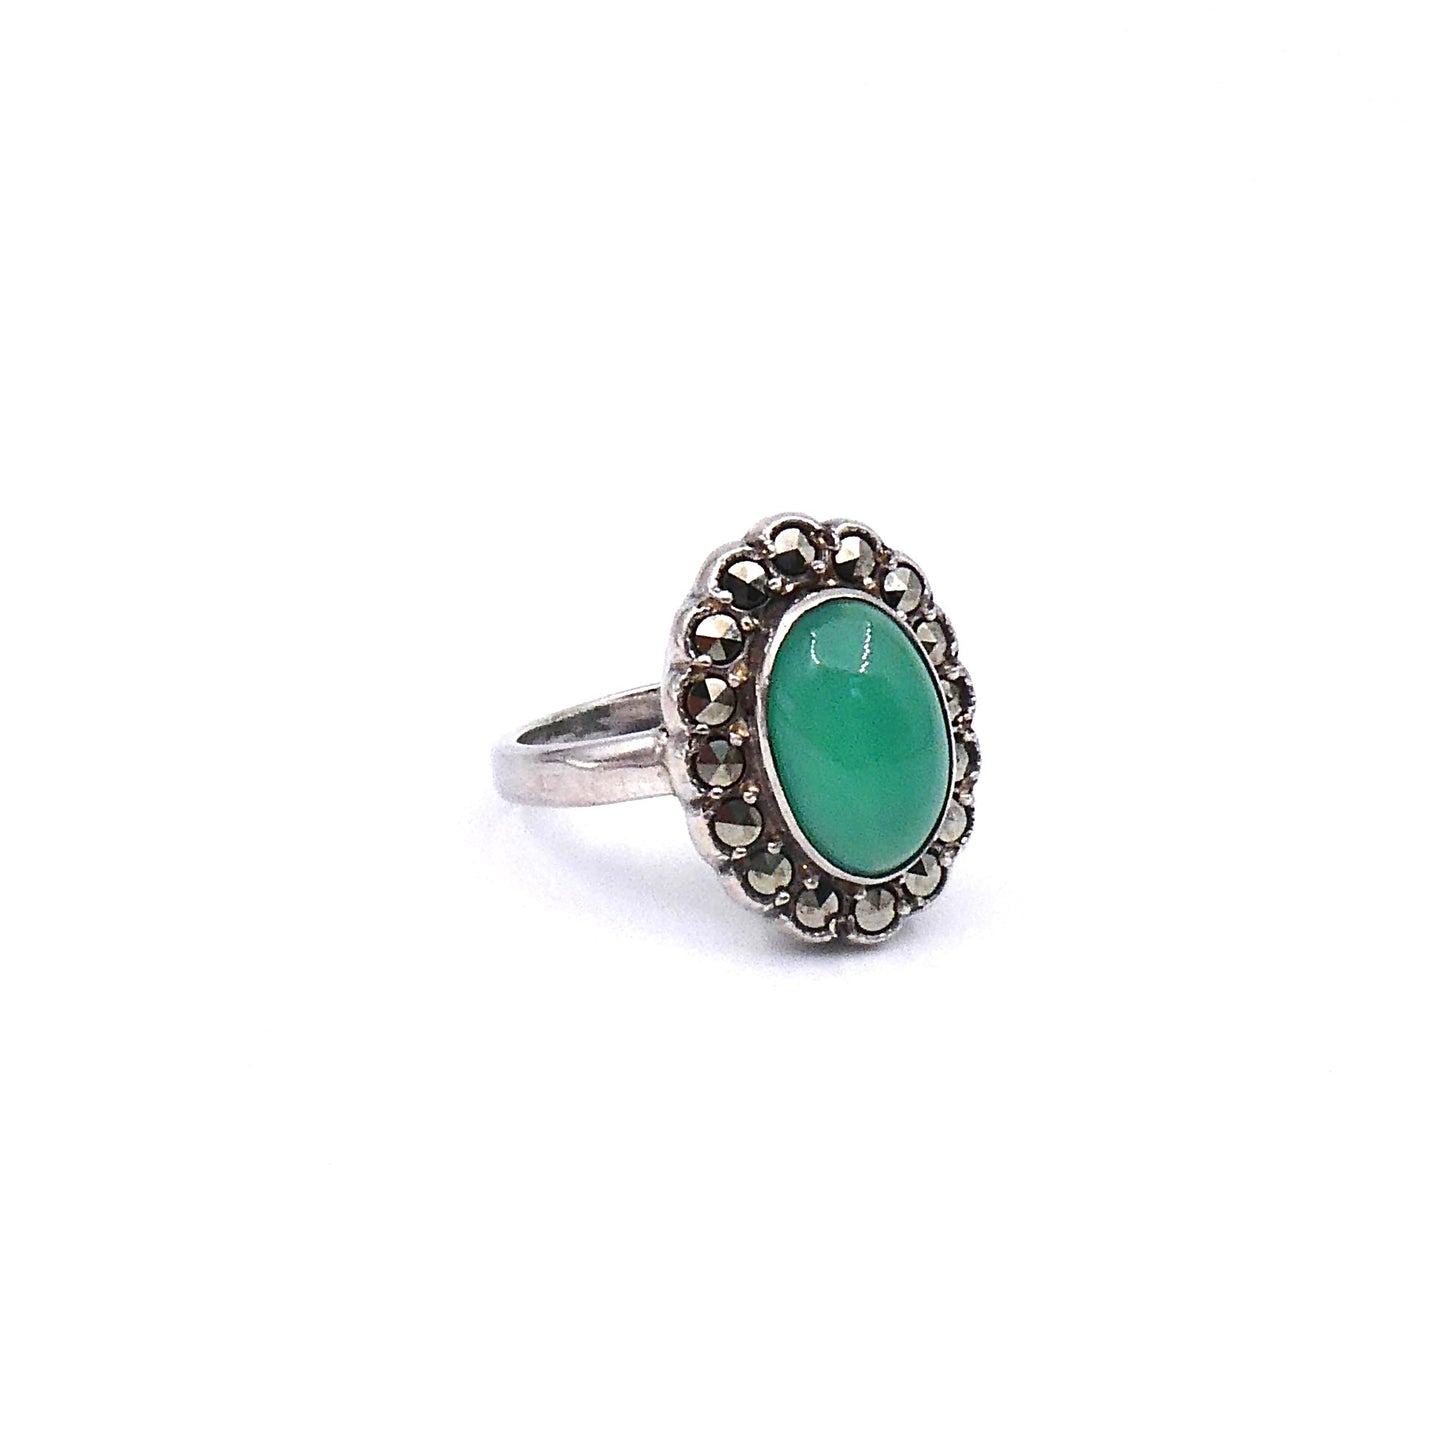 Beautiful Jade ring, featuresa cabochon of green Jade with a surrounding border of marcasite. - Collected